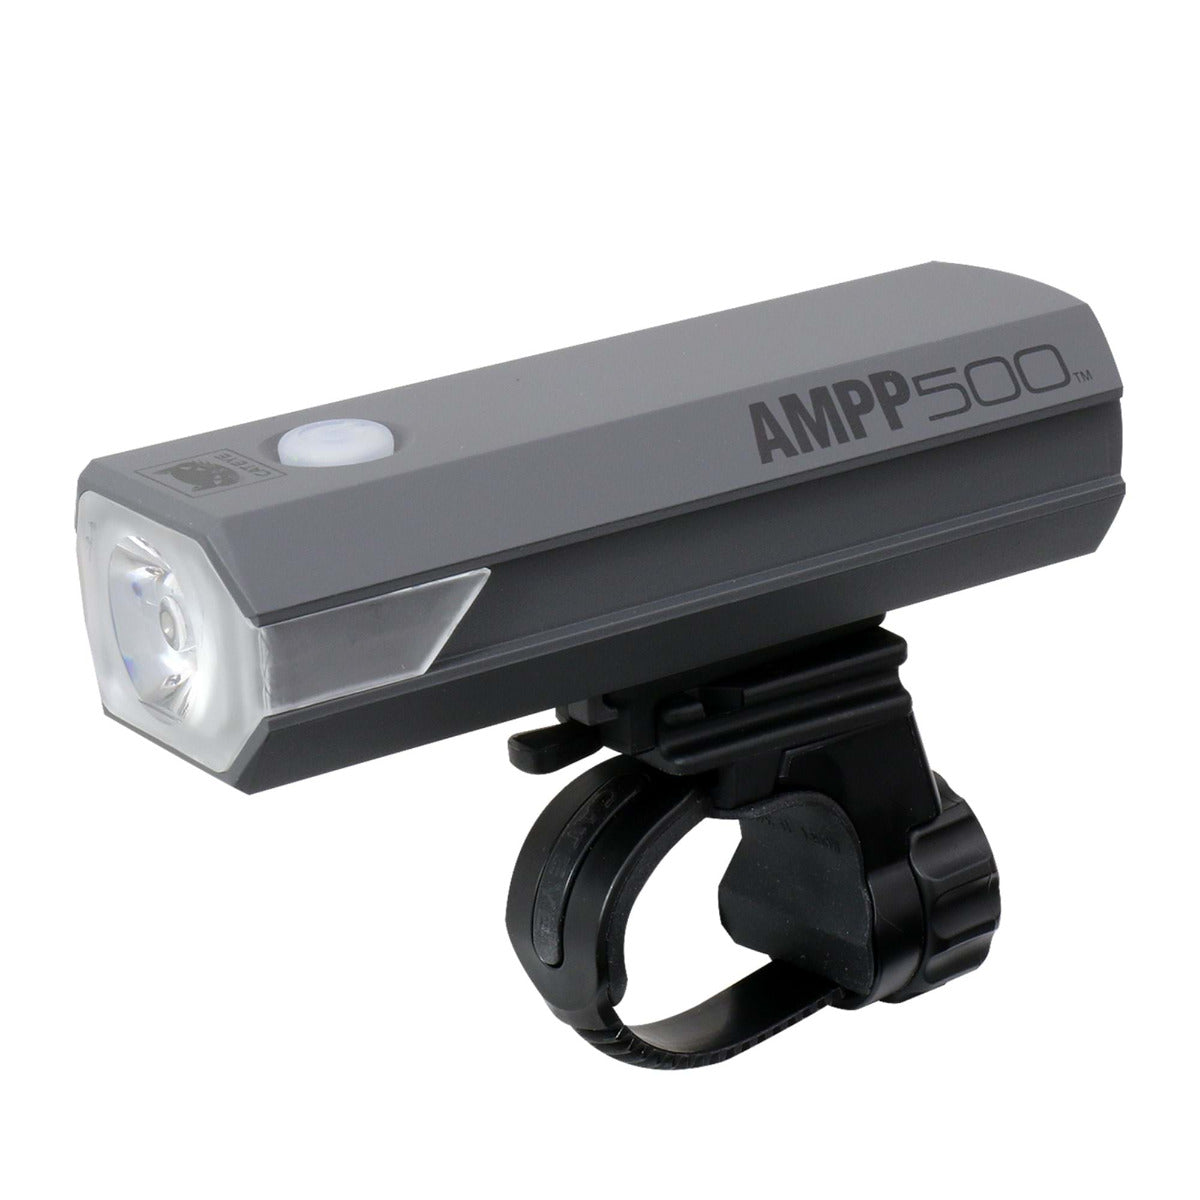 Cateye Ampp 500 Rechargeable Front Light